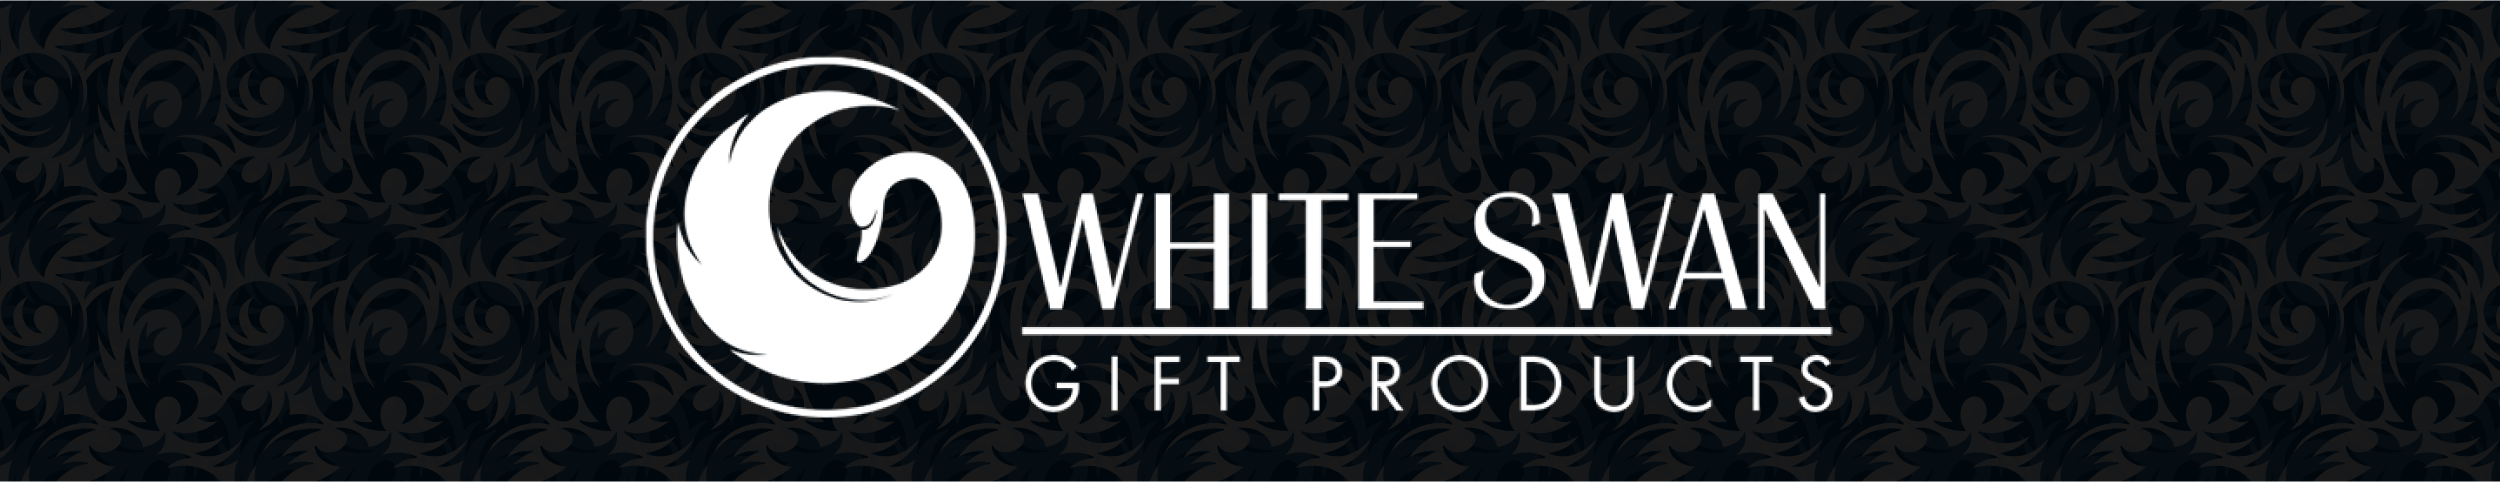 White Swan Gift Products Logo Banner